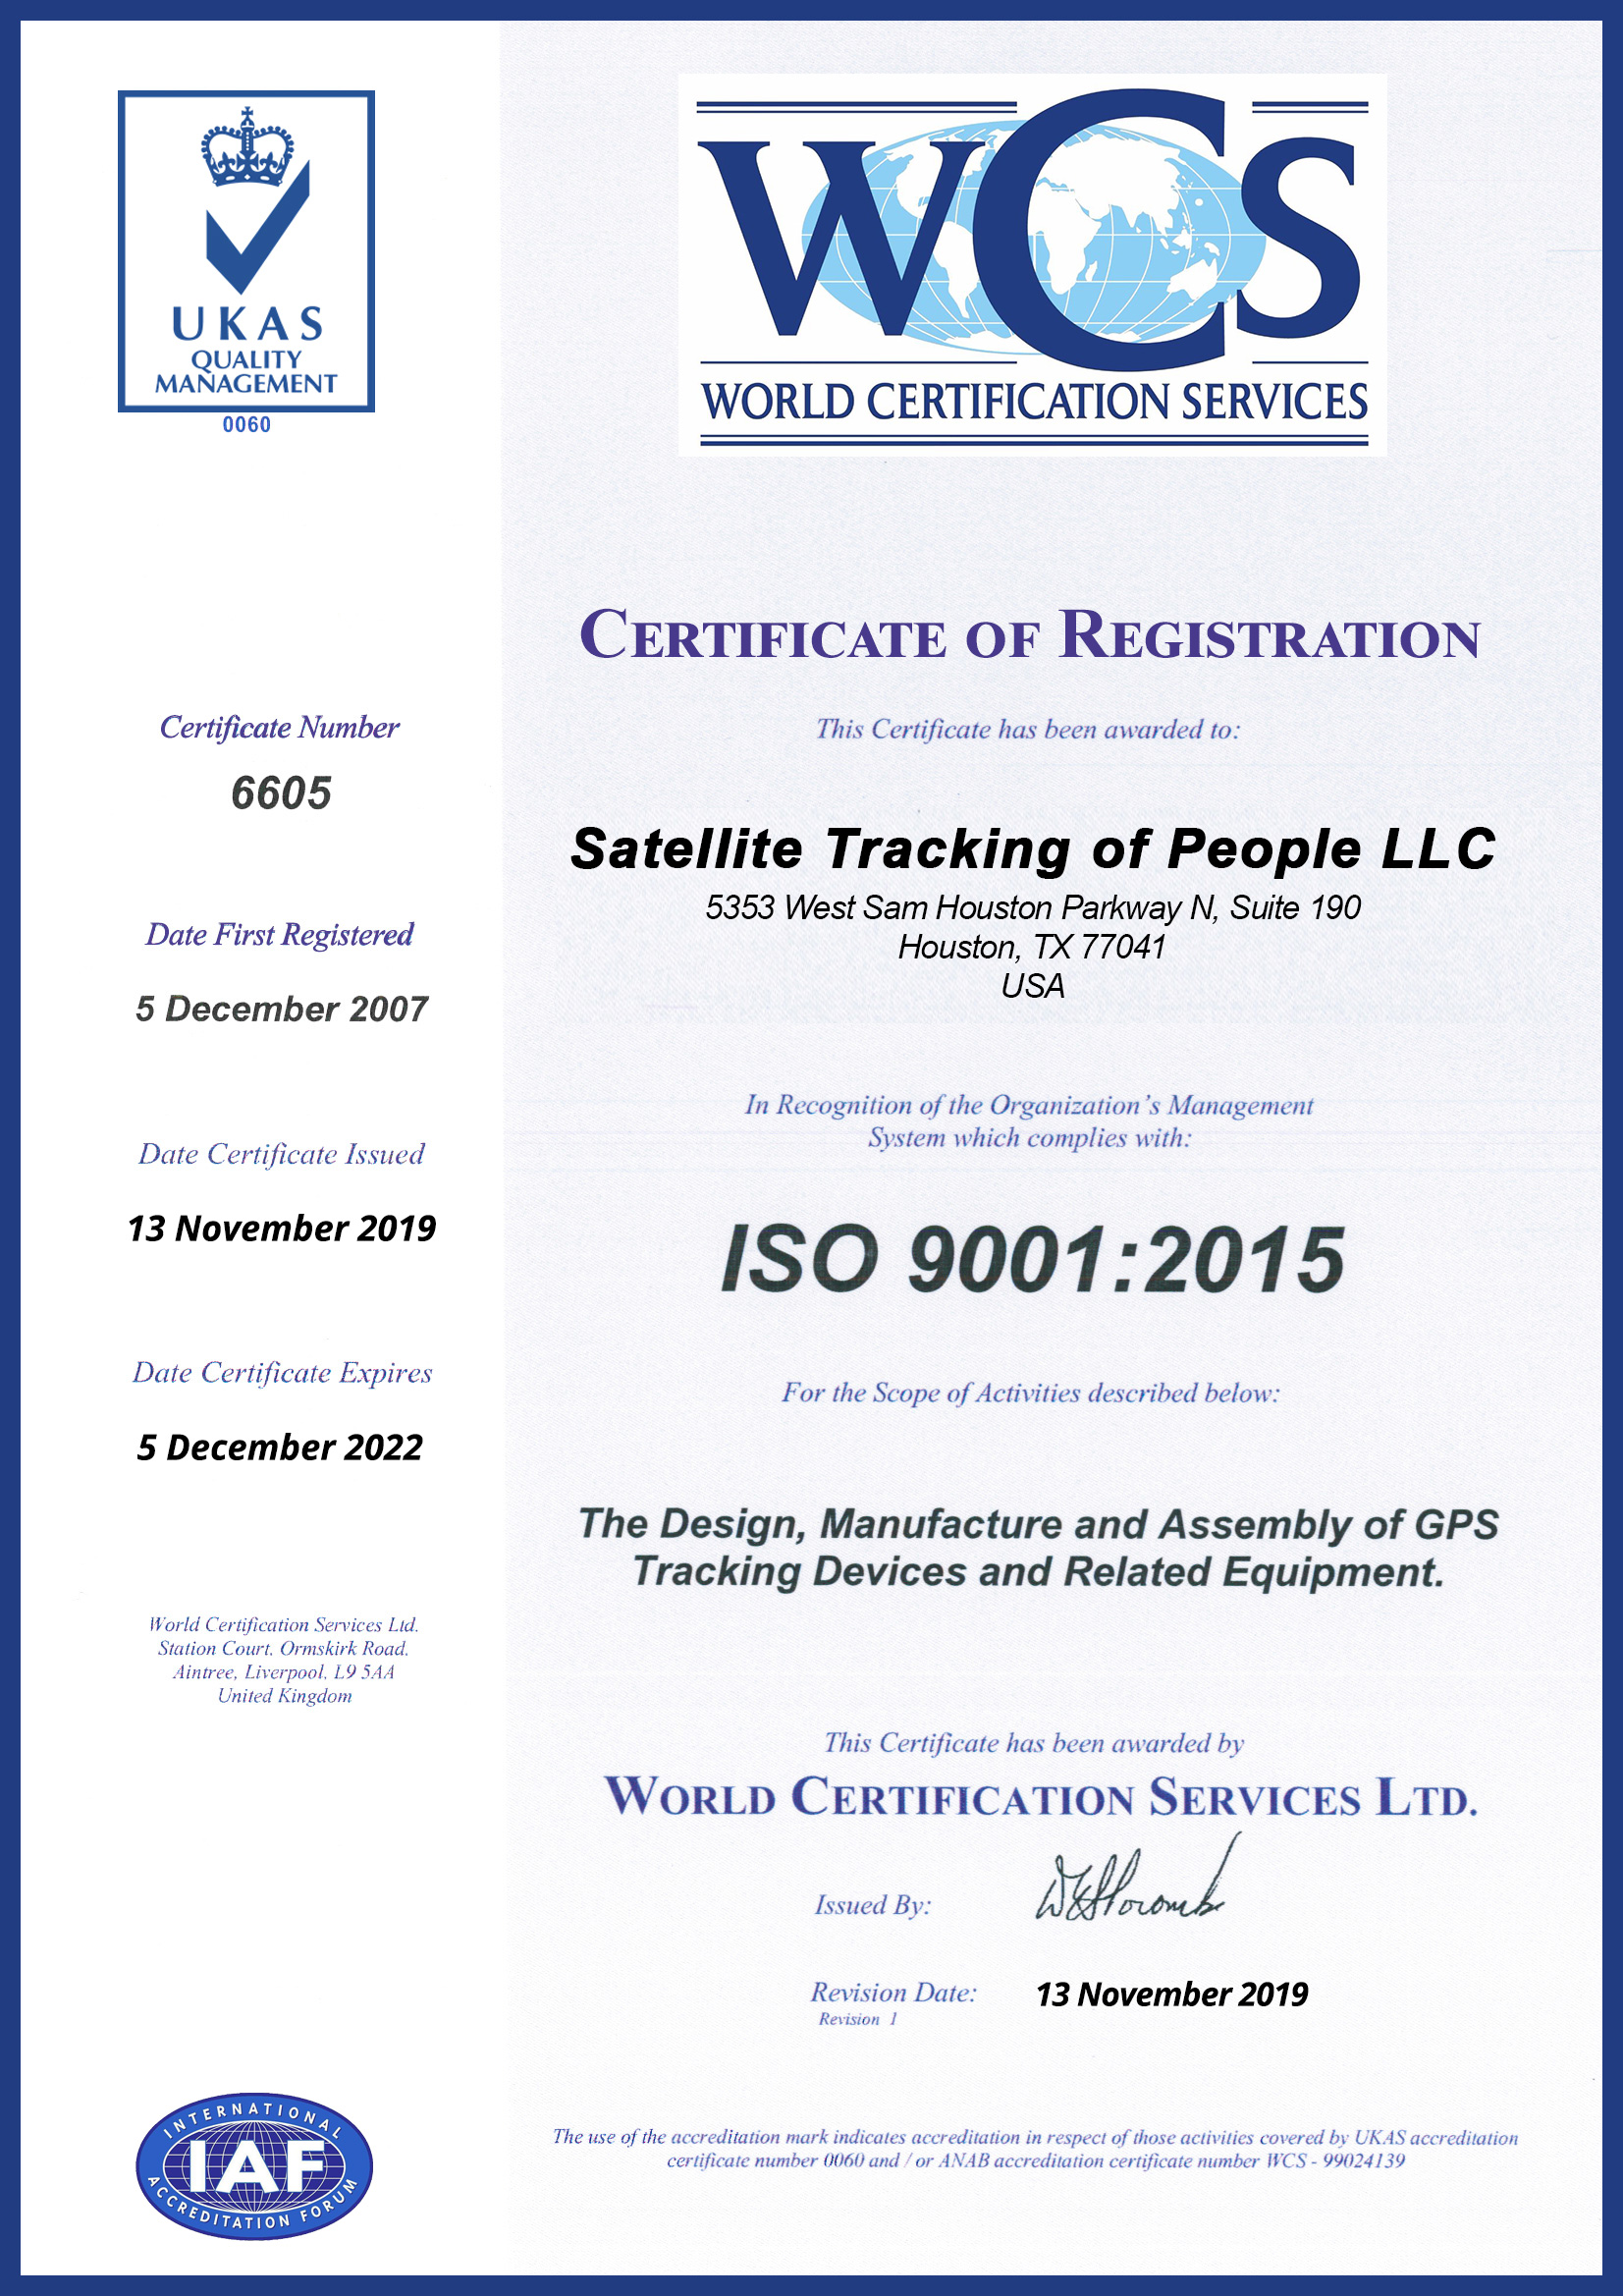 Securus Monitoring Solutions is ISO:9001 Certified